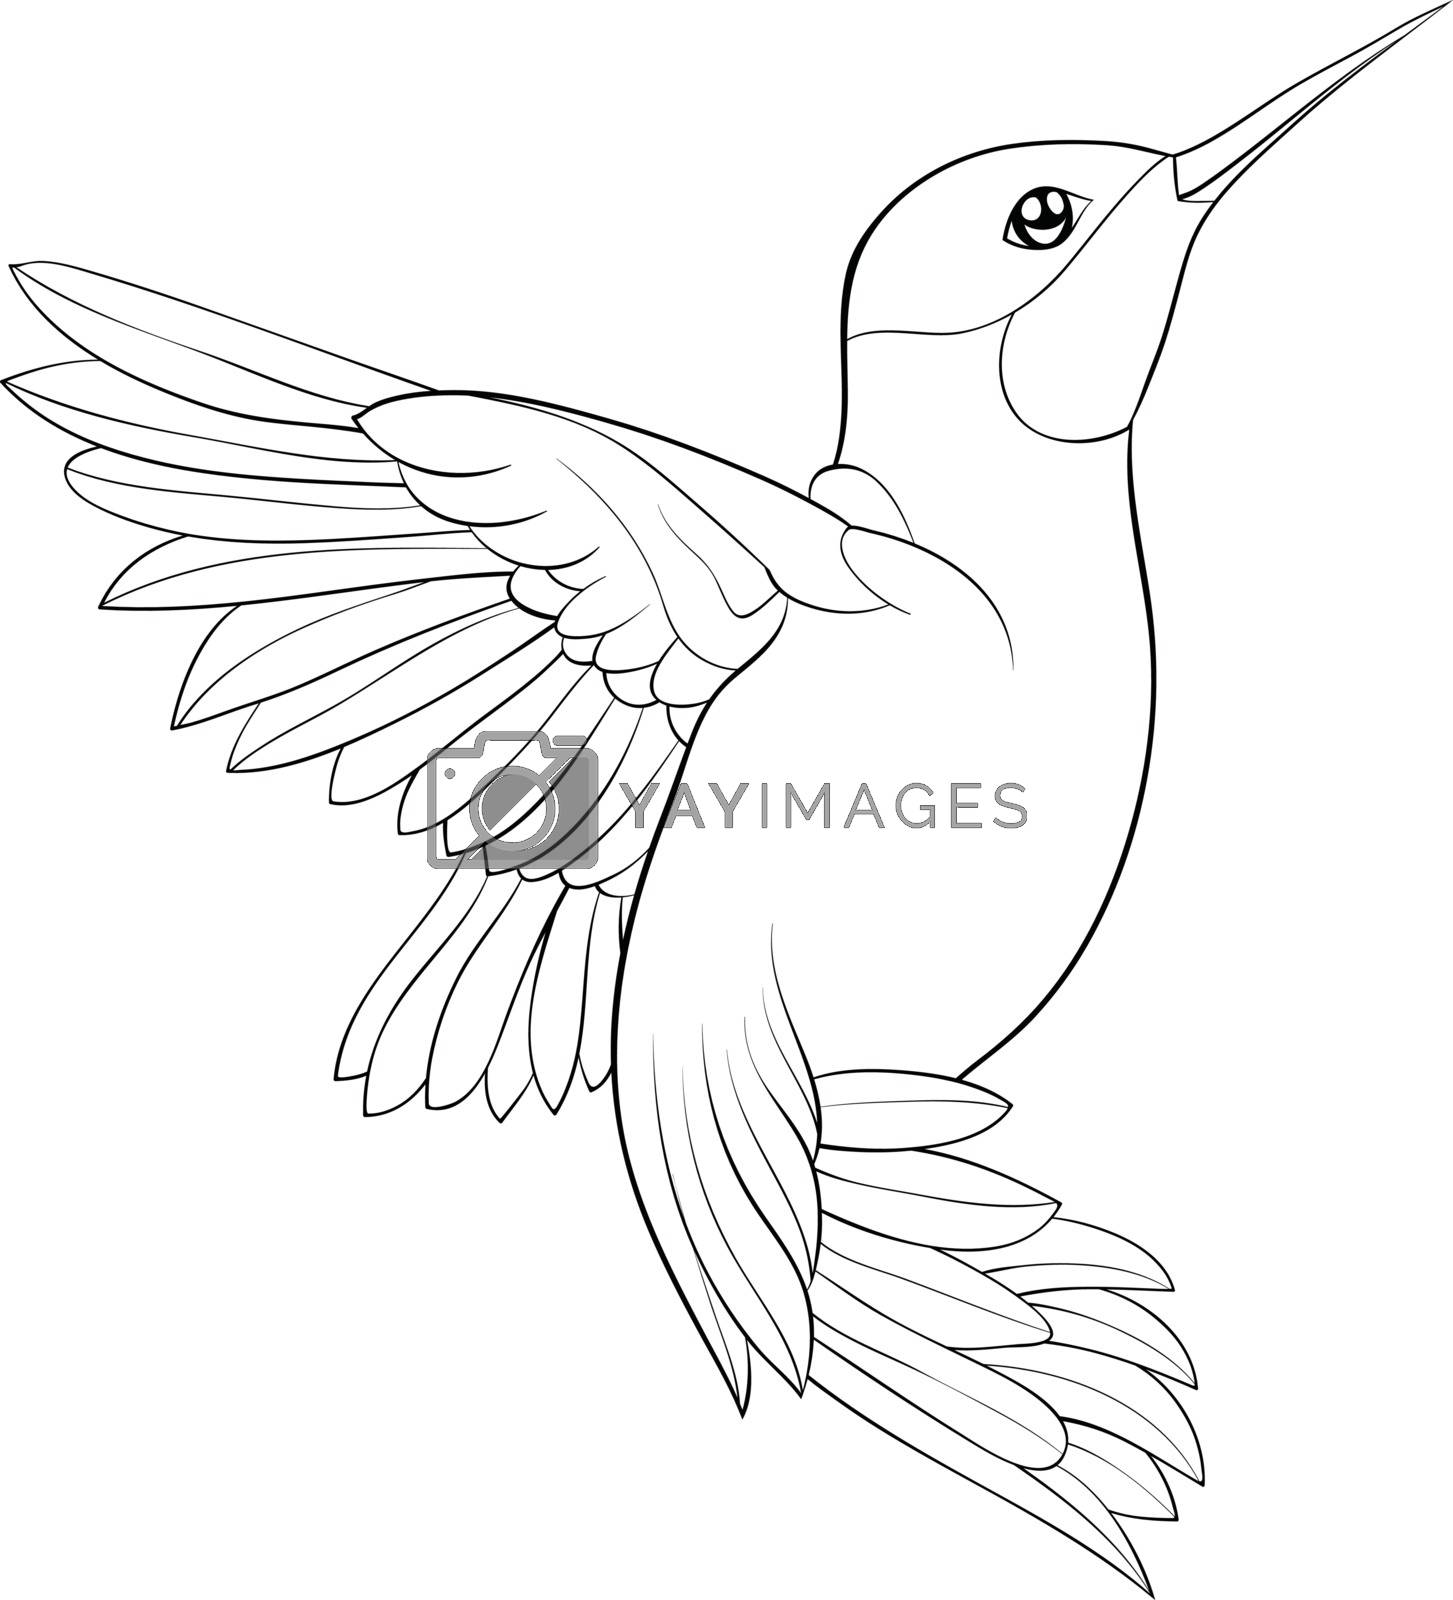 Adult coloring bookpage a cute hummingbird image for relaxing by nonuzza vectors illustrations with unlimited downloads